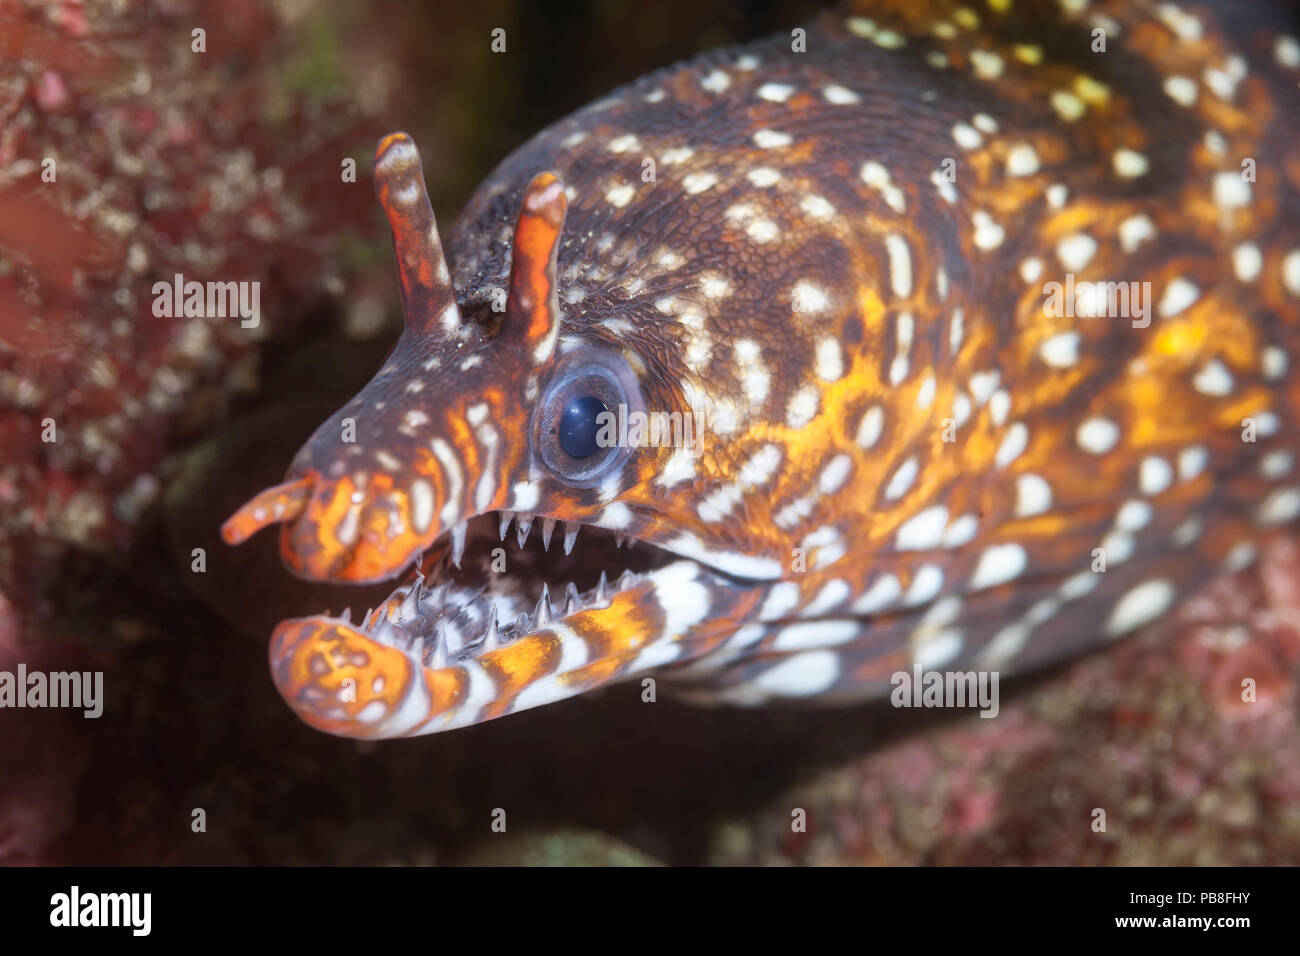 Dragon moray eel (Enchelycore pardalis) living among boulders and rock formations off the east coast of the Izu Peninsula in Japan. Stock Photo